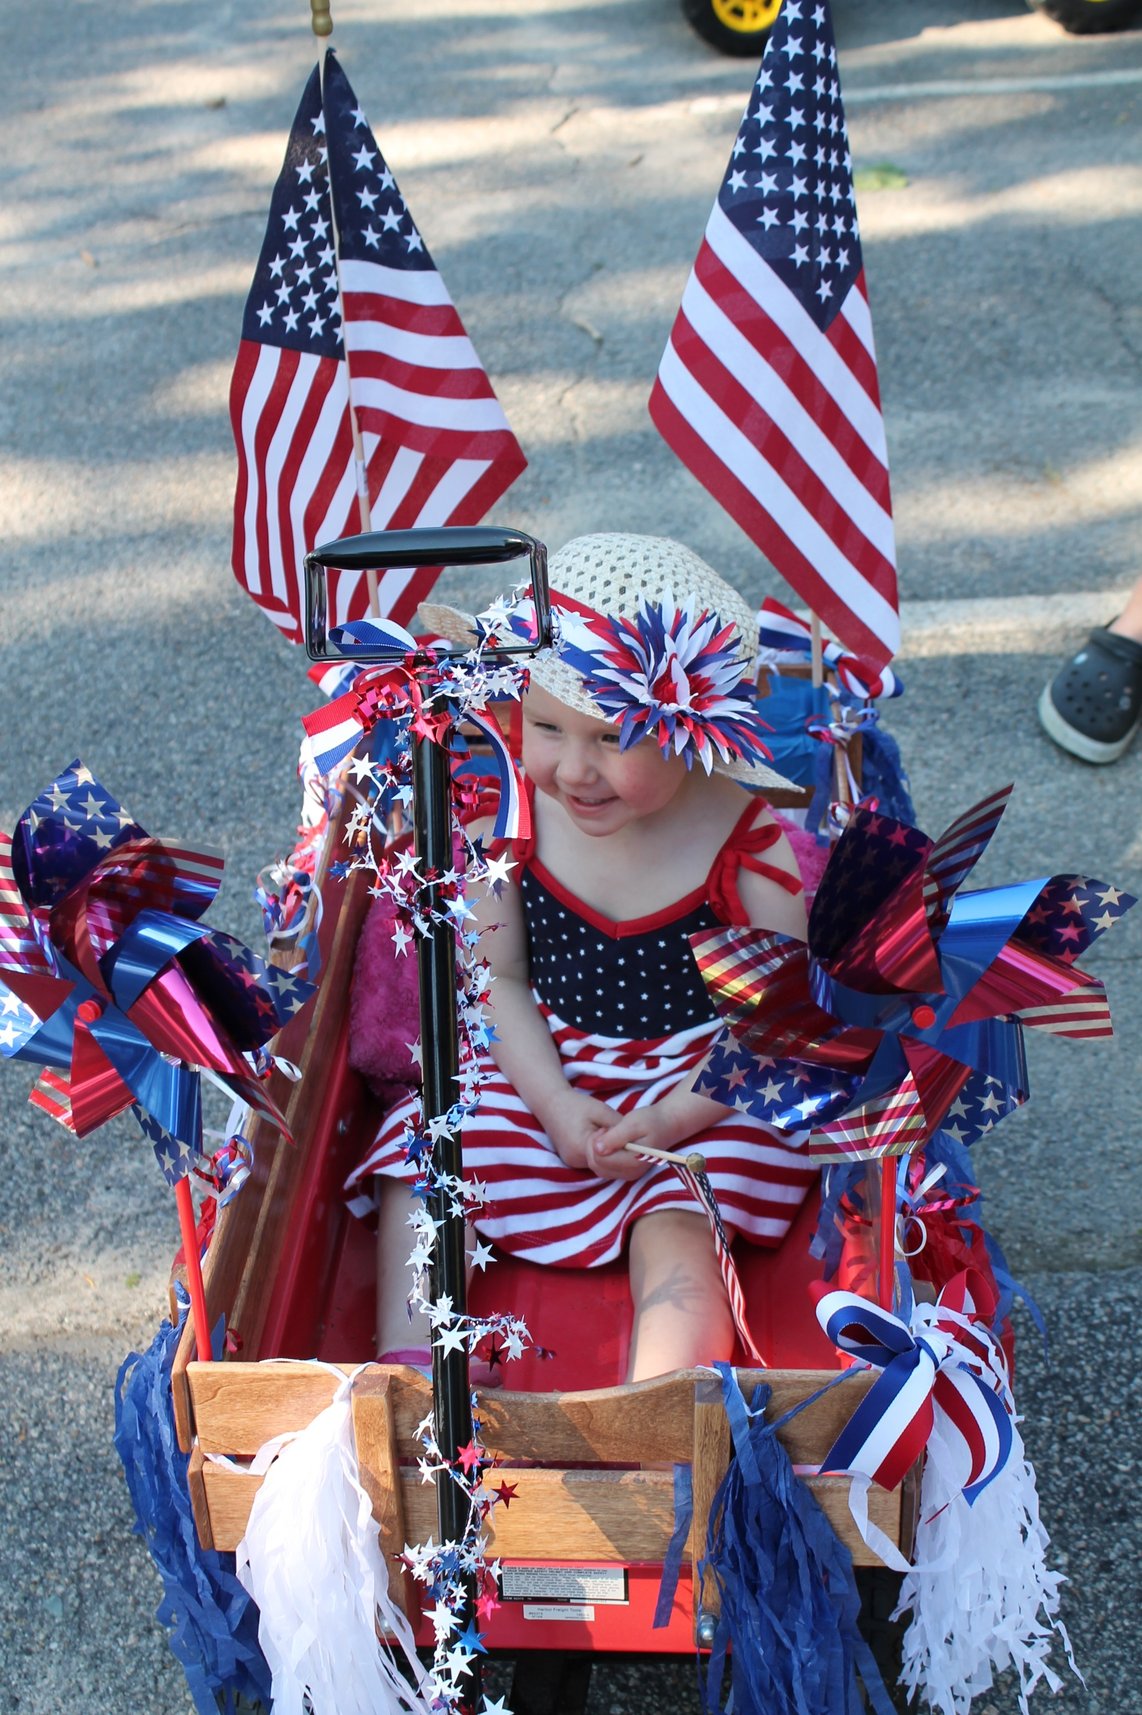 4th of July On Cape Cod, Events, Parades, Fireworks!